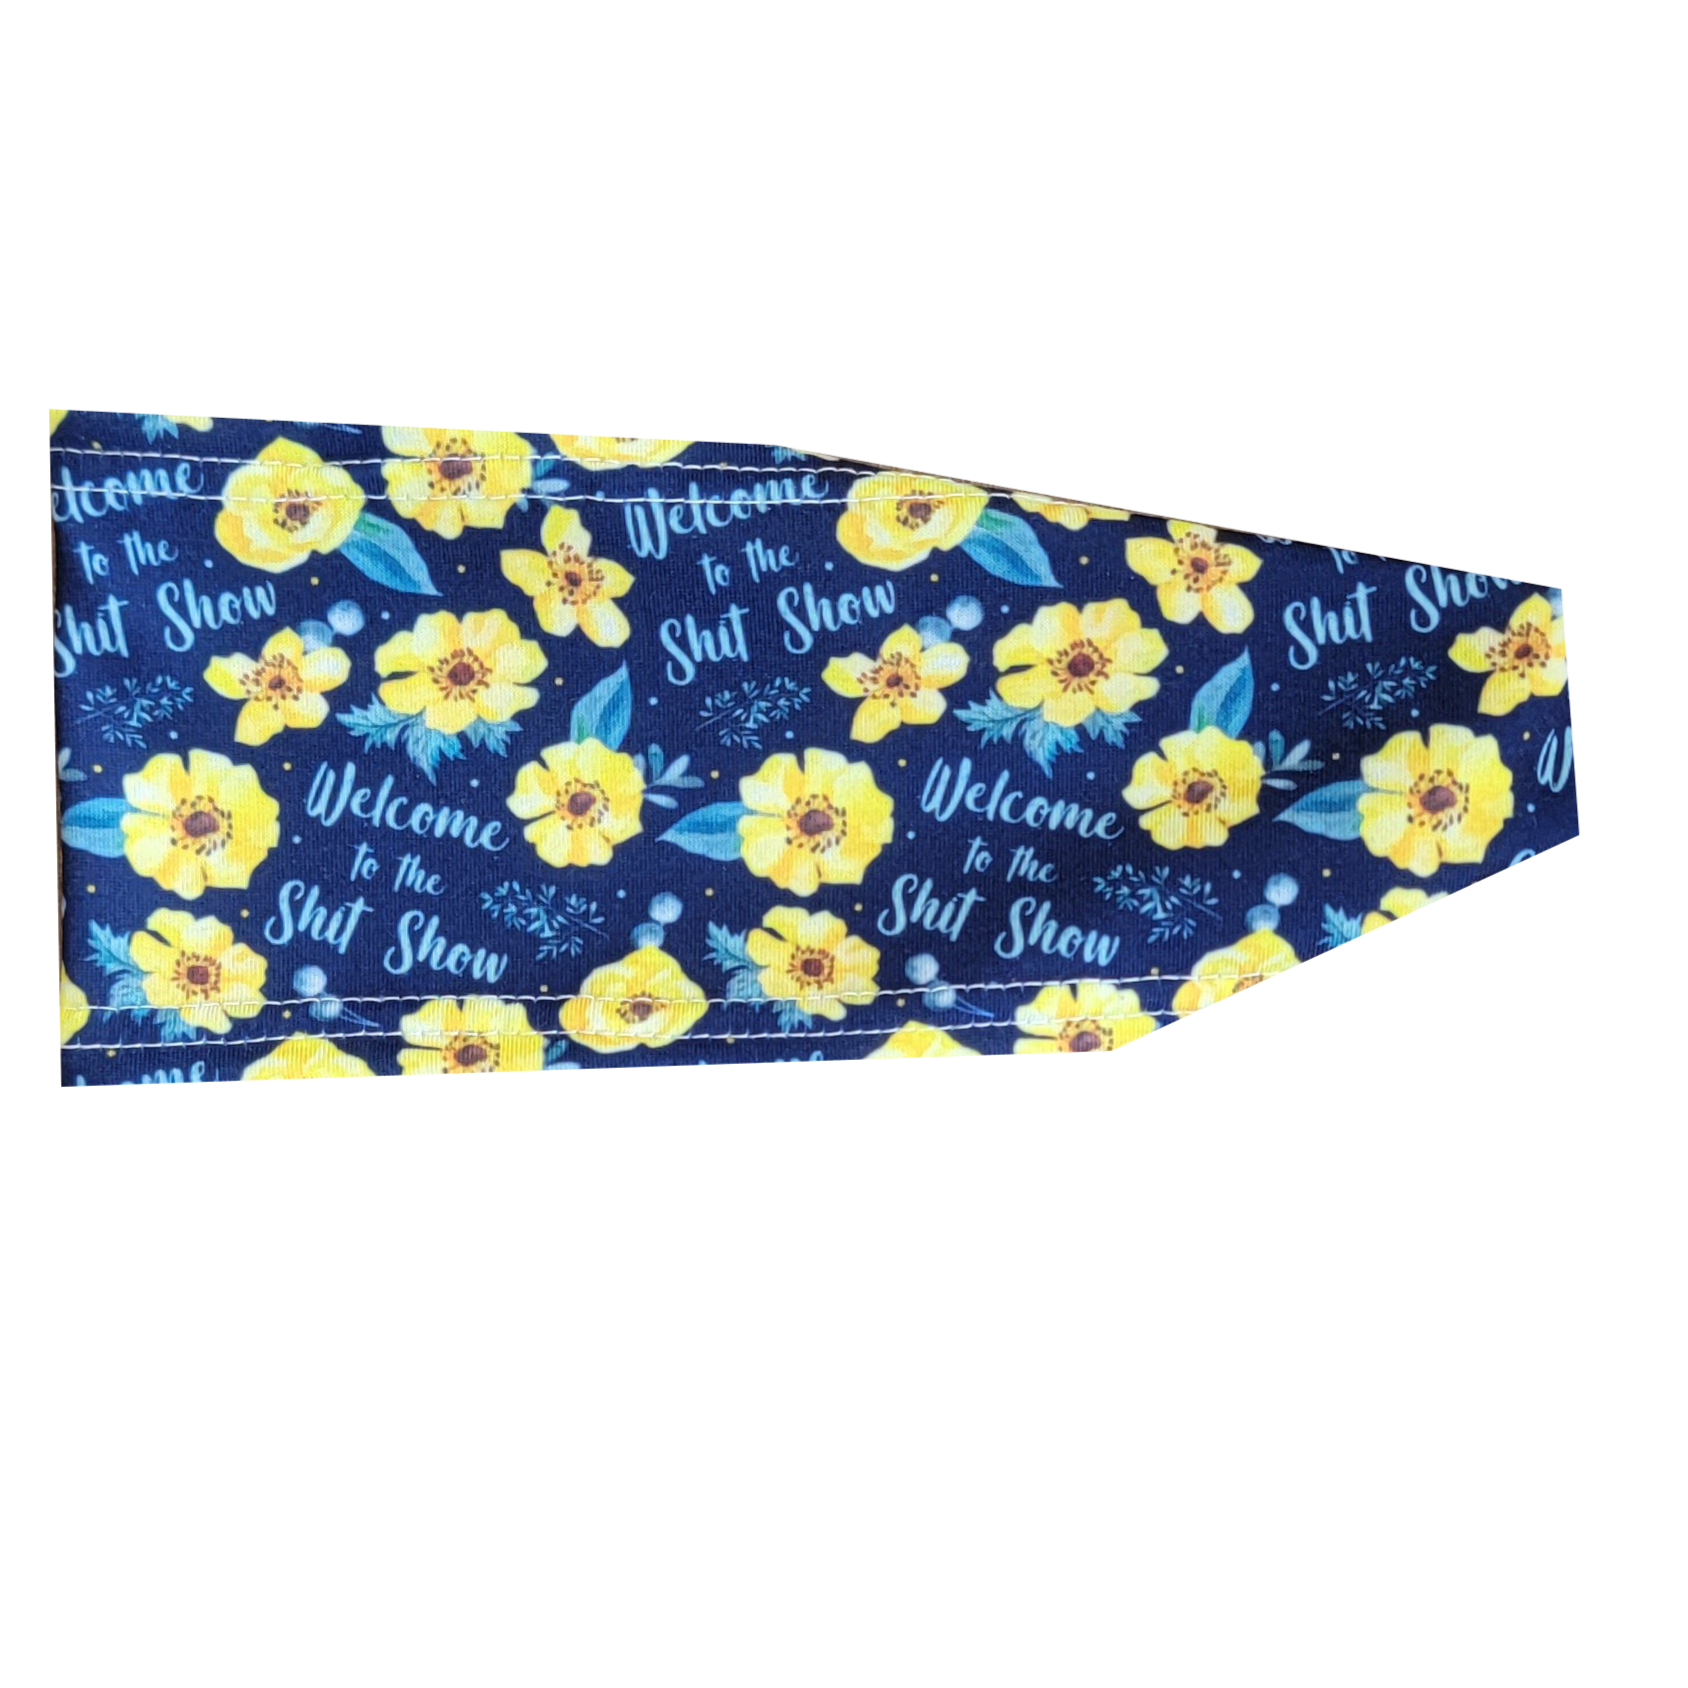 nay blue headband with yellow flowers and wording welcome to the shit show